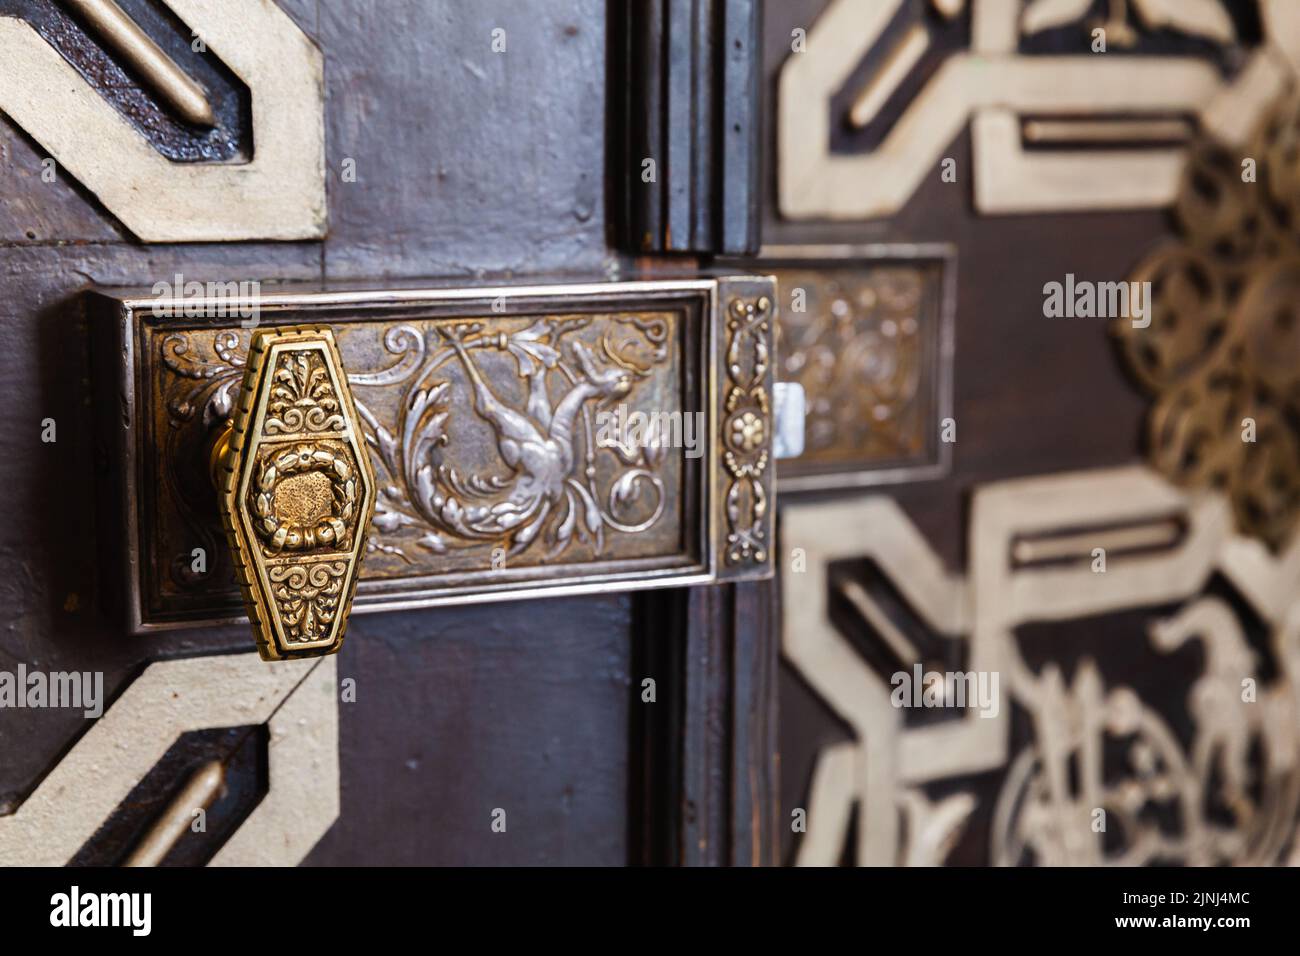 Vintage lock on an old oriental wooden door decorated with ornaments Stock Photo